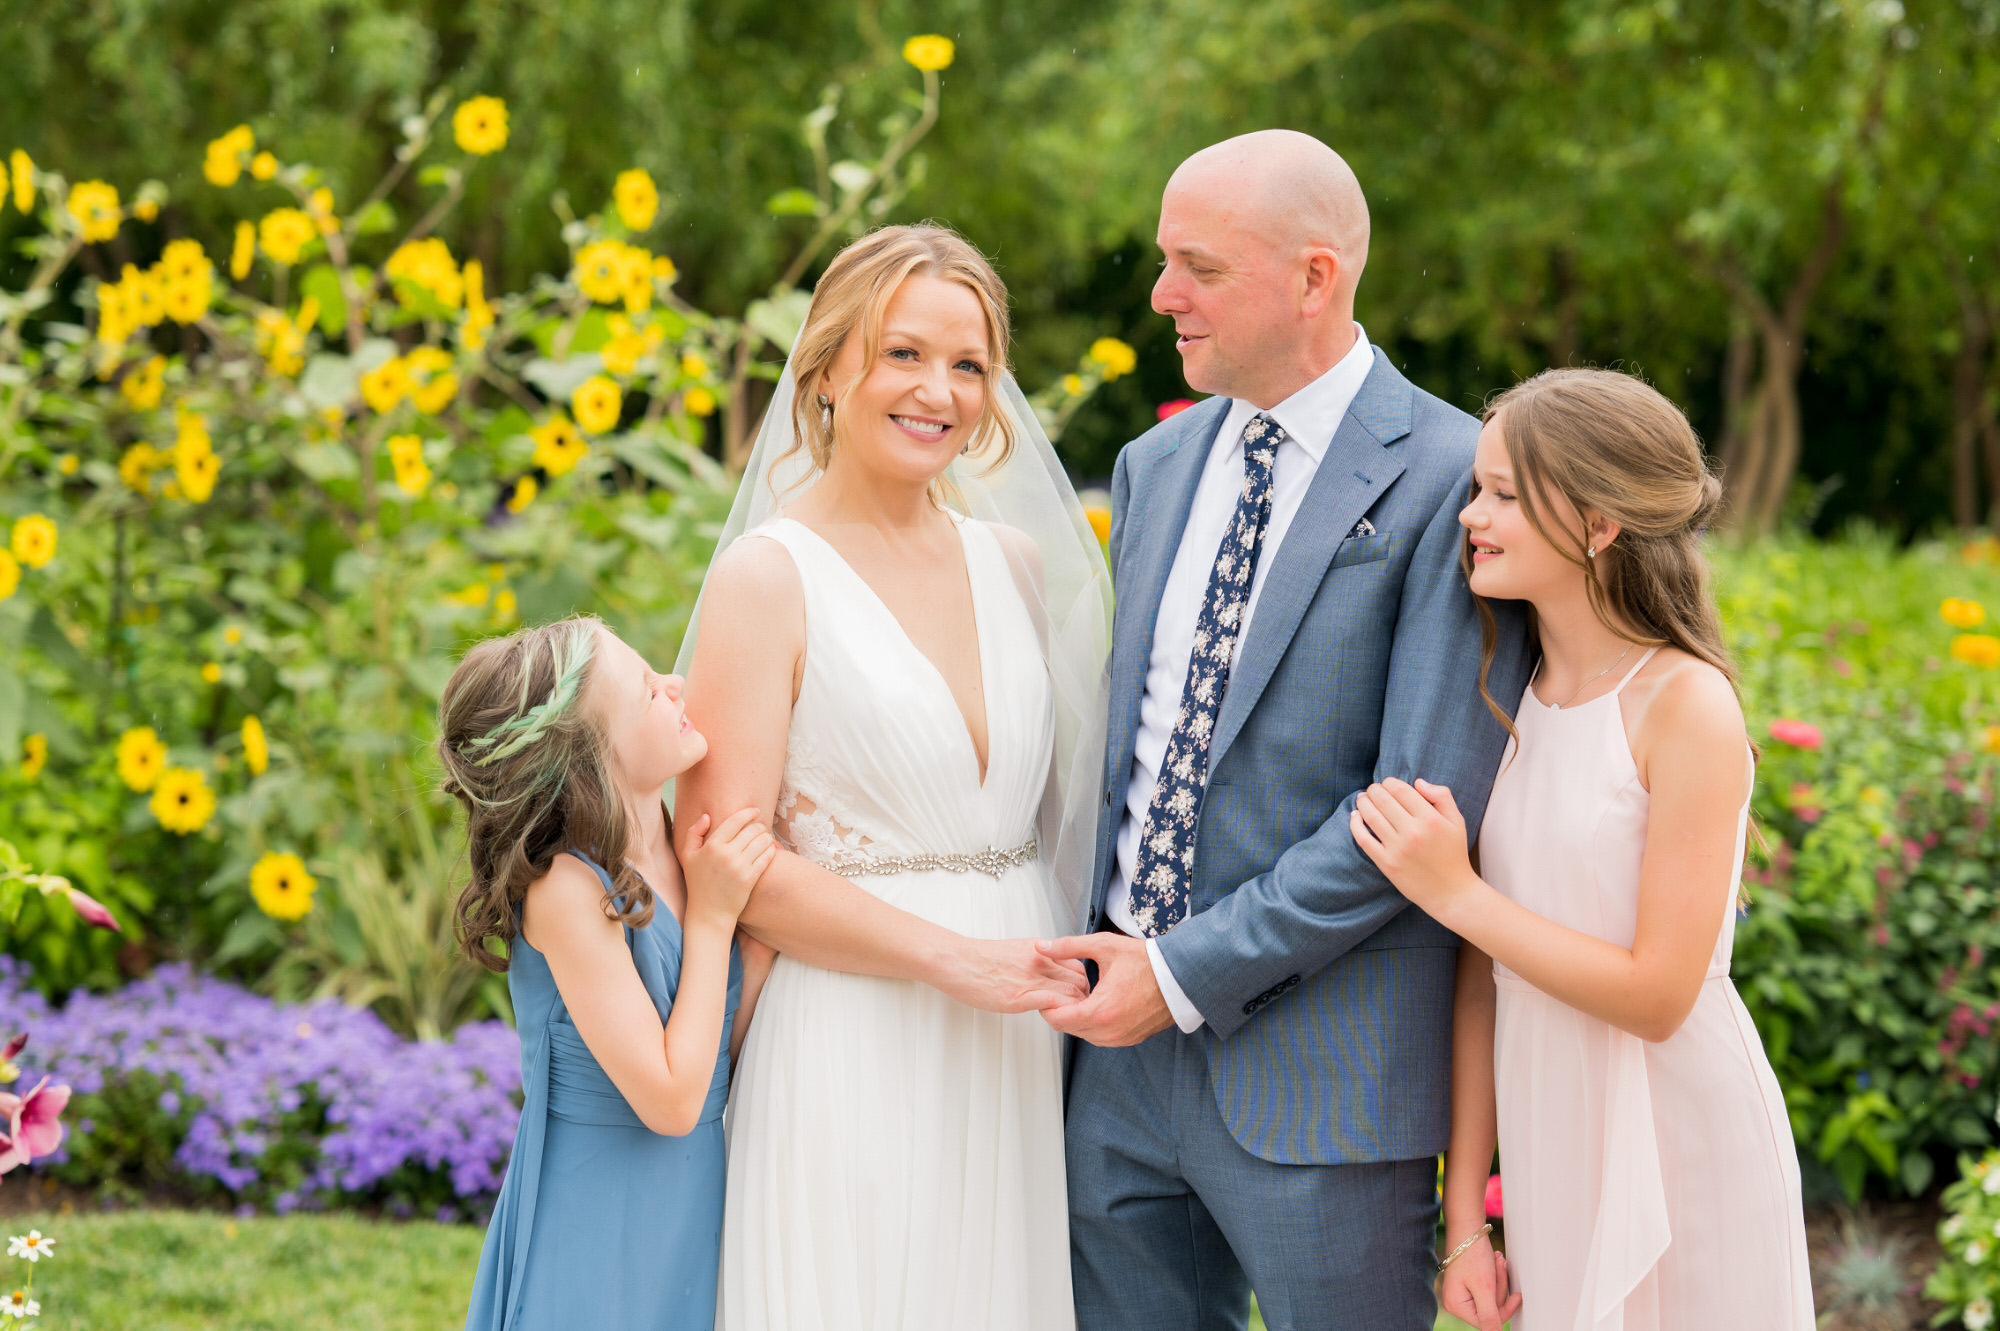 small family second weddings photography pittsburgh • Small Weddings